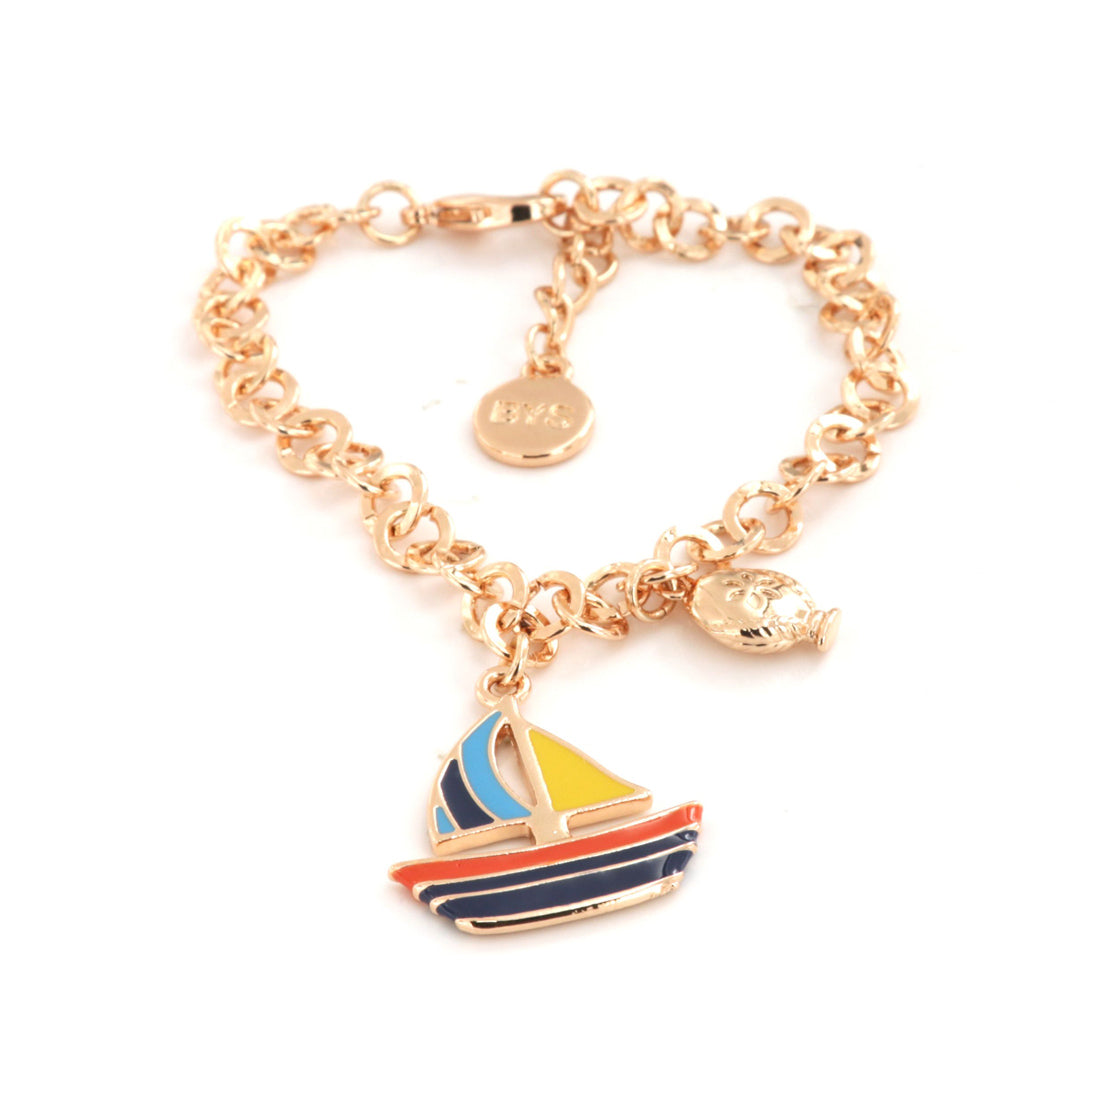 Metal bracelet with pendant boat, embellished with colored enamels and mini pumo on the side